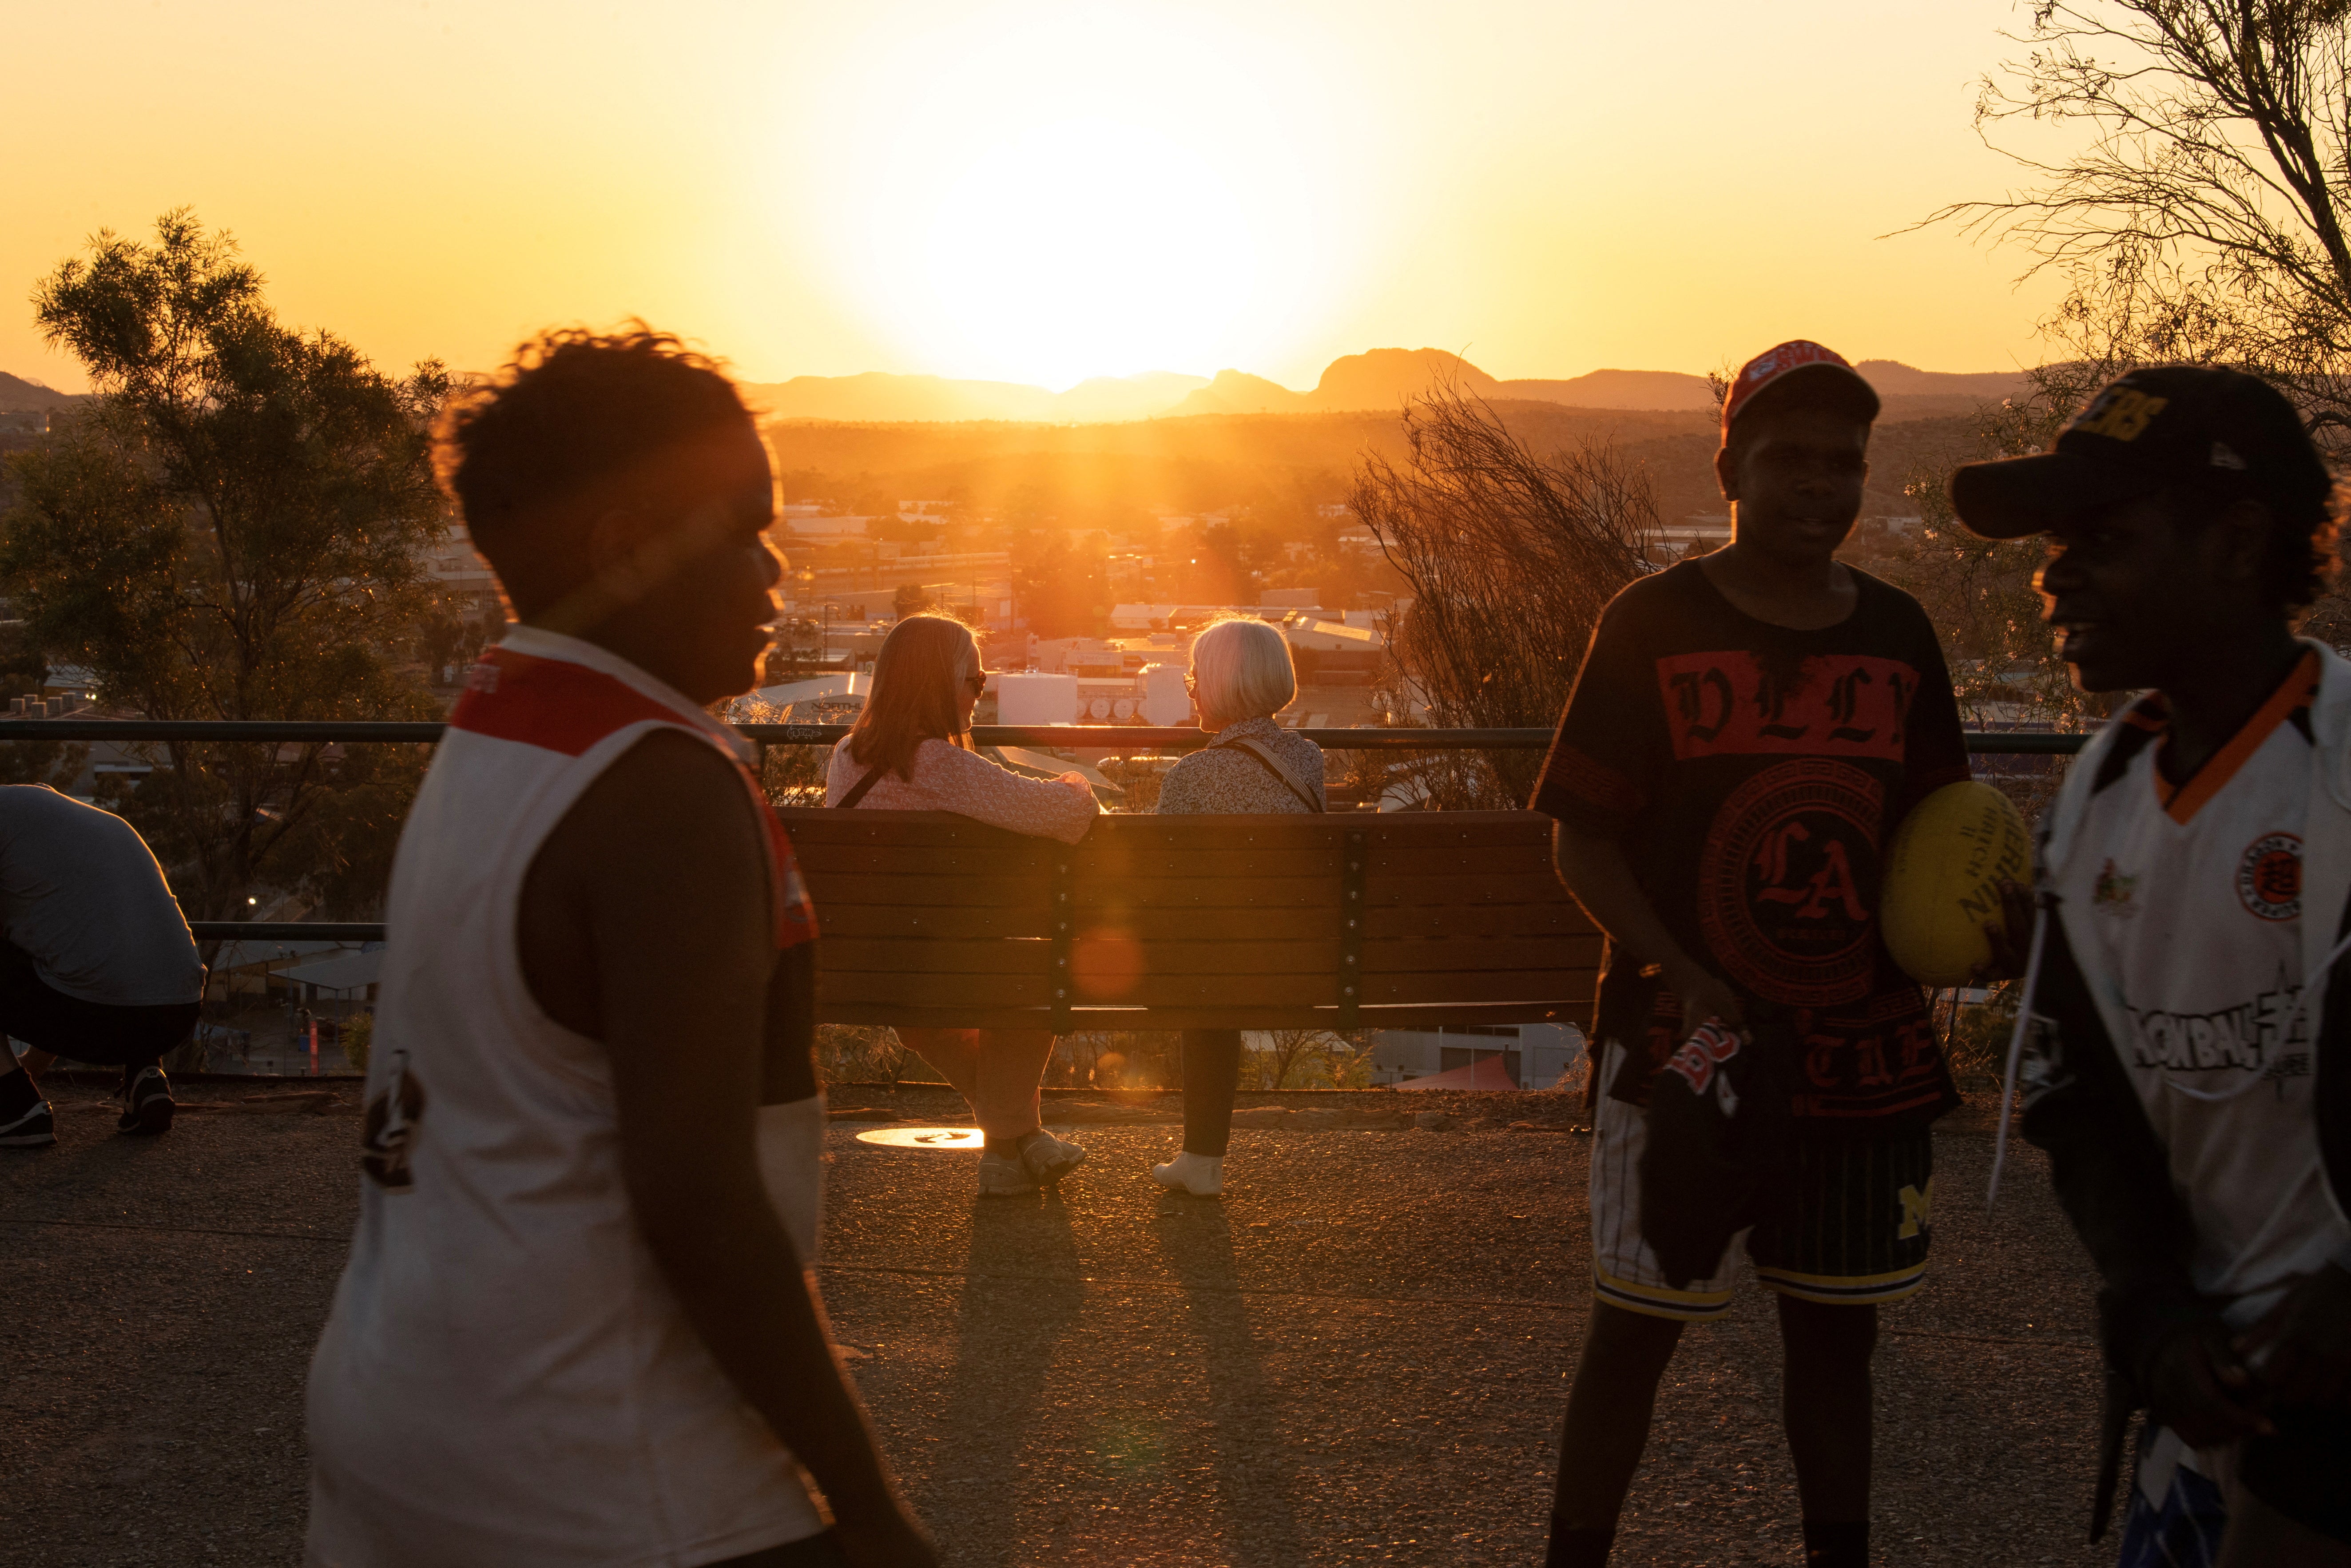 Boys play as people watch the sunset over Alice Springs